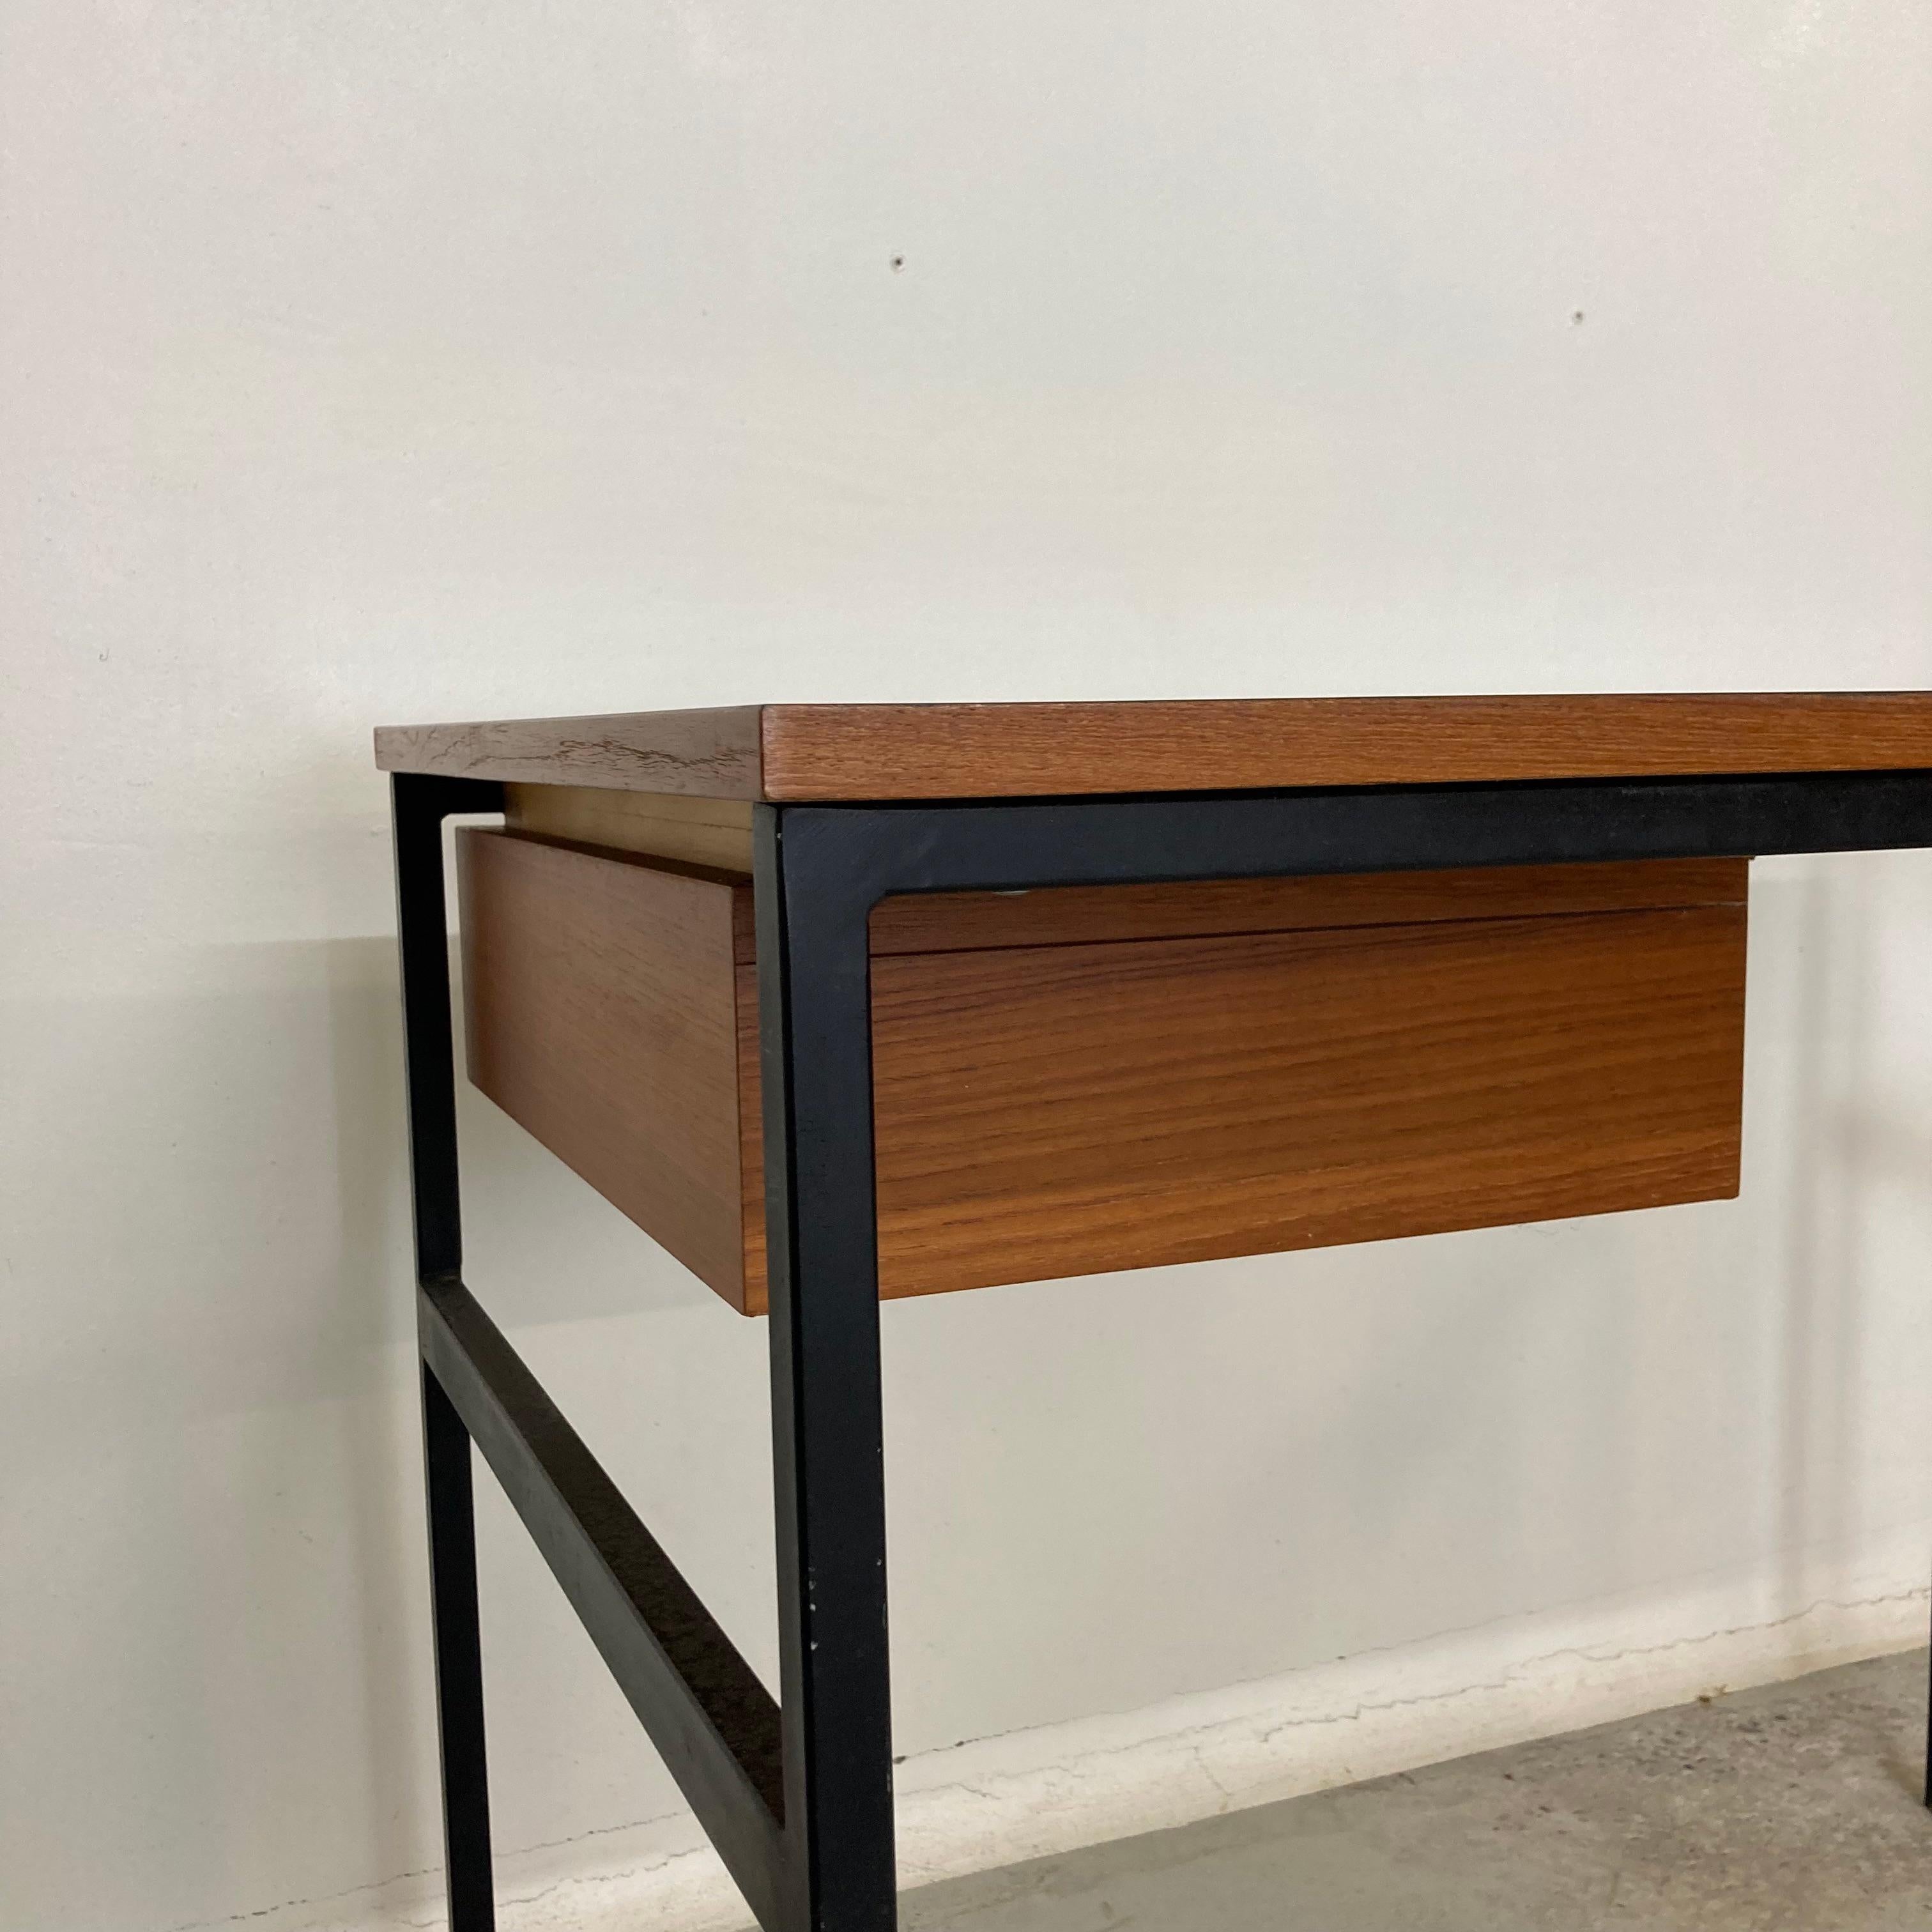 Pierre Paulin & Thonet Desk with Drawer, Metal Teak & Formica, France Circa 1955 For Sale 9